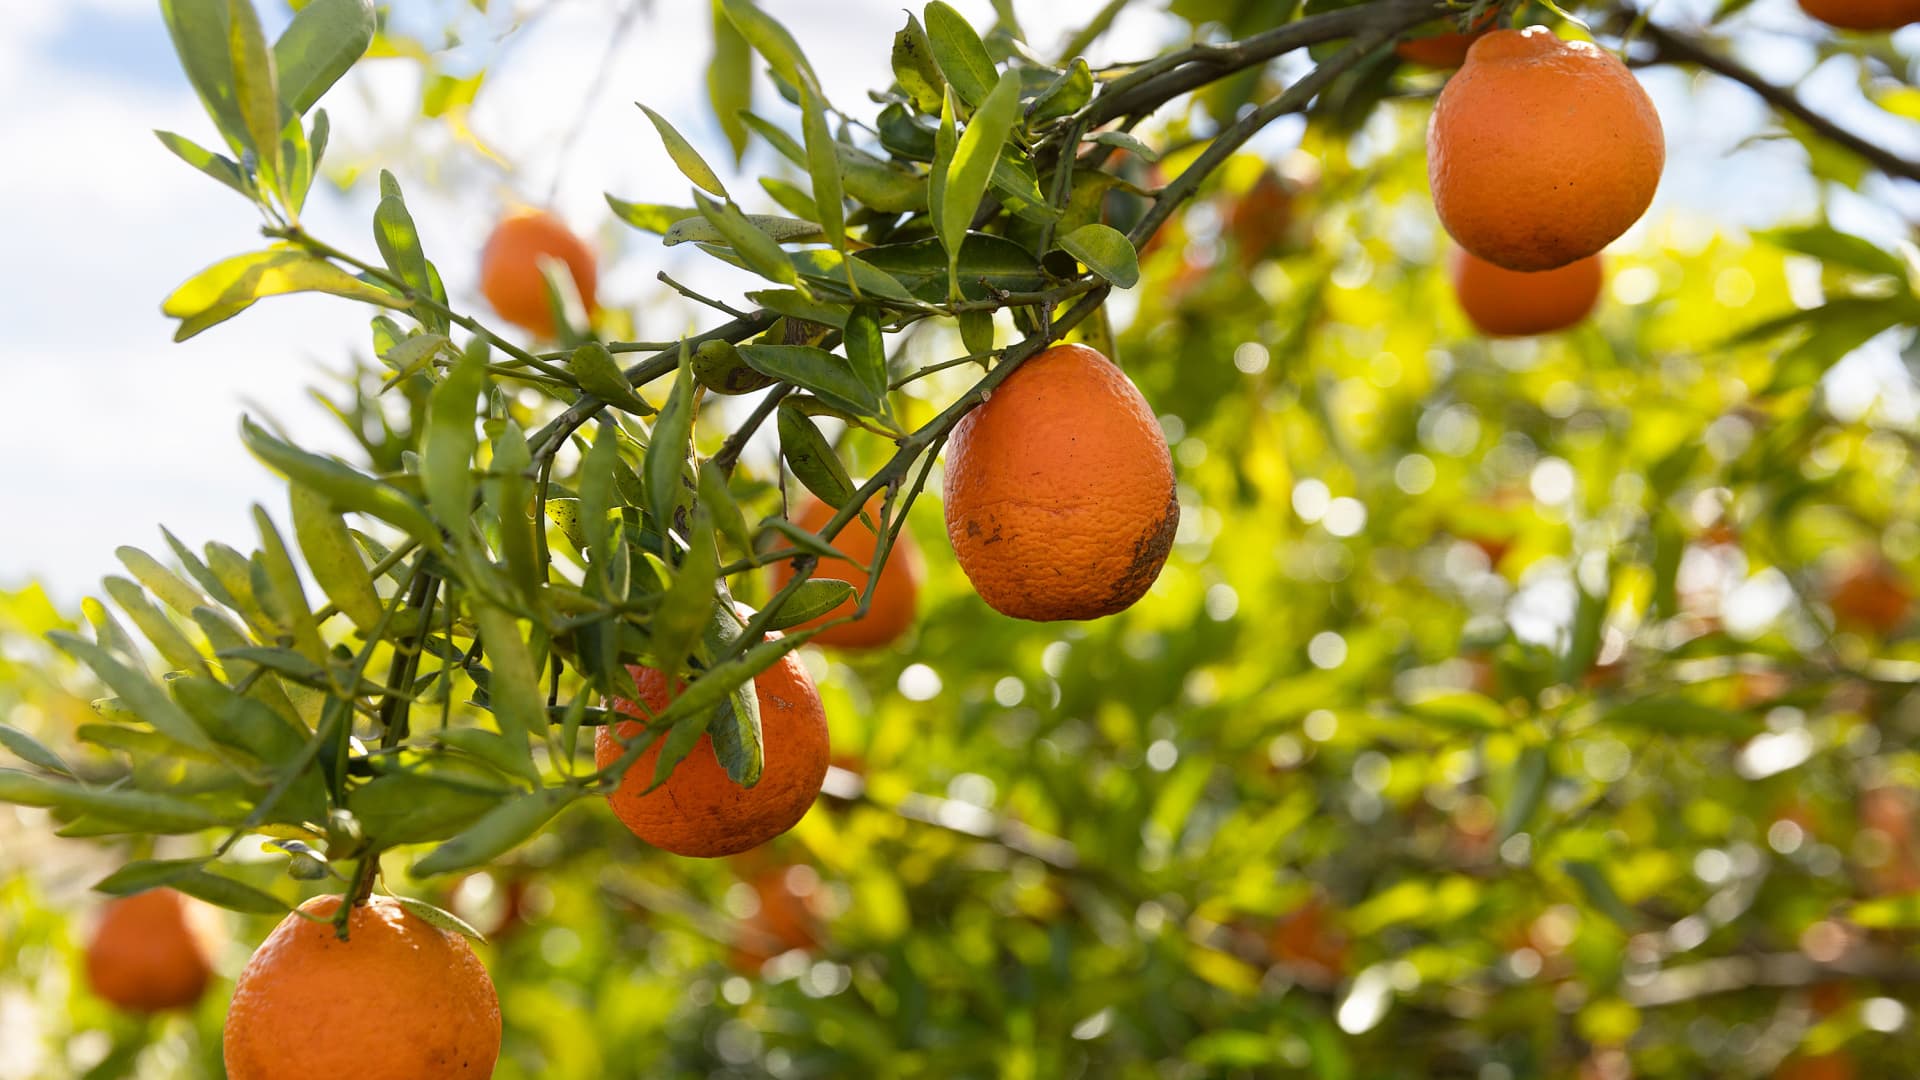 Oranges hang on a tree at one of the Peace River Packing Company groves on February 01, 2022 in Fort Meade, Florida.